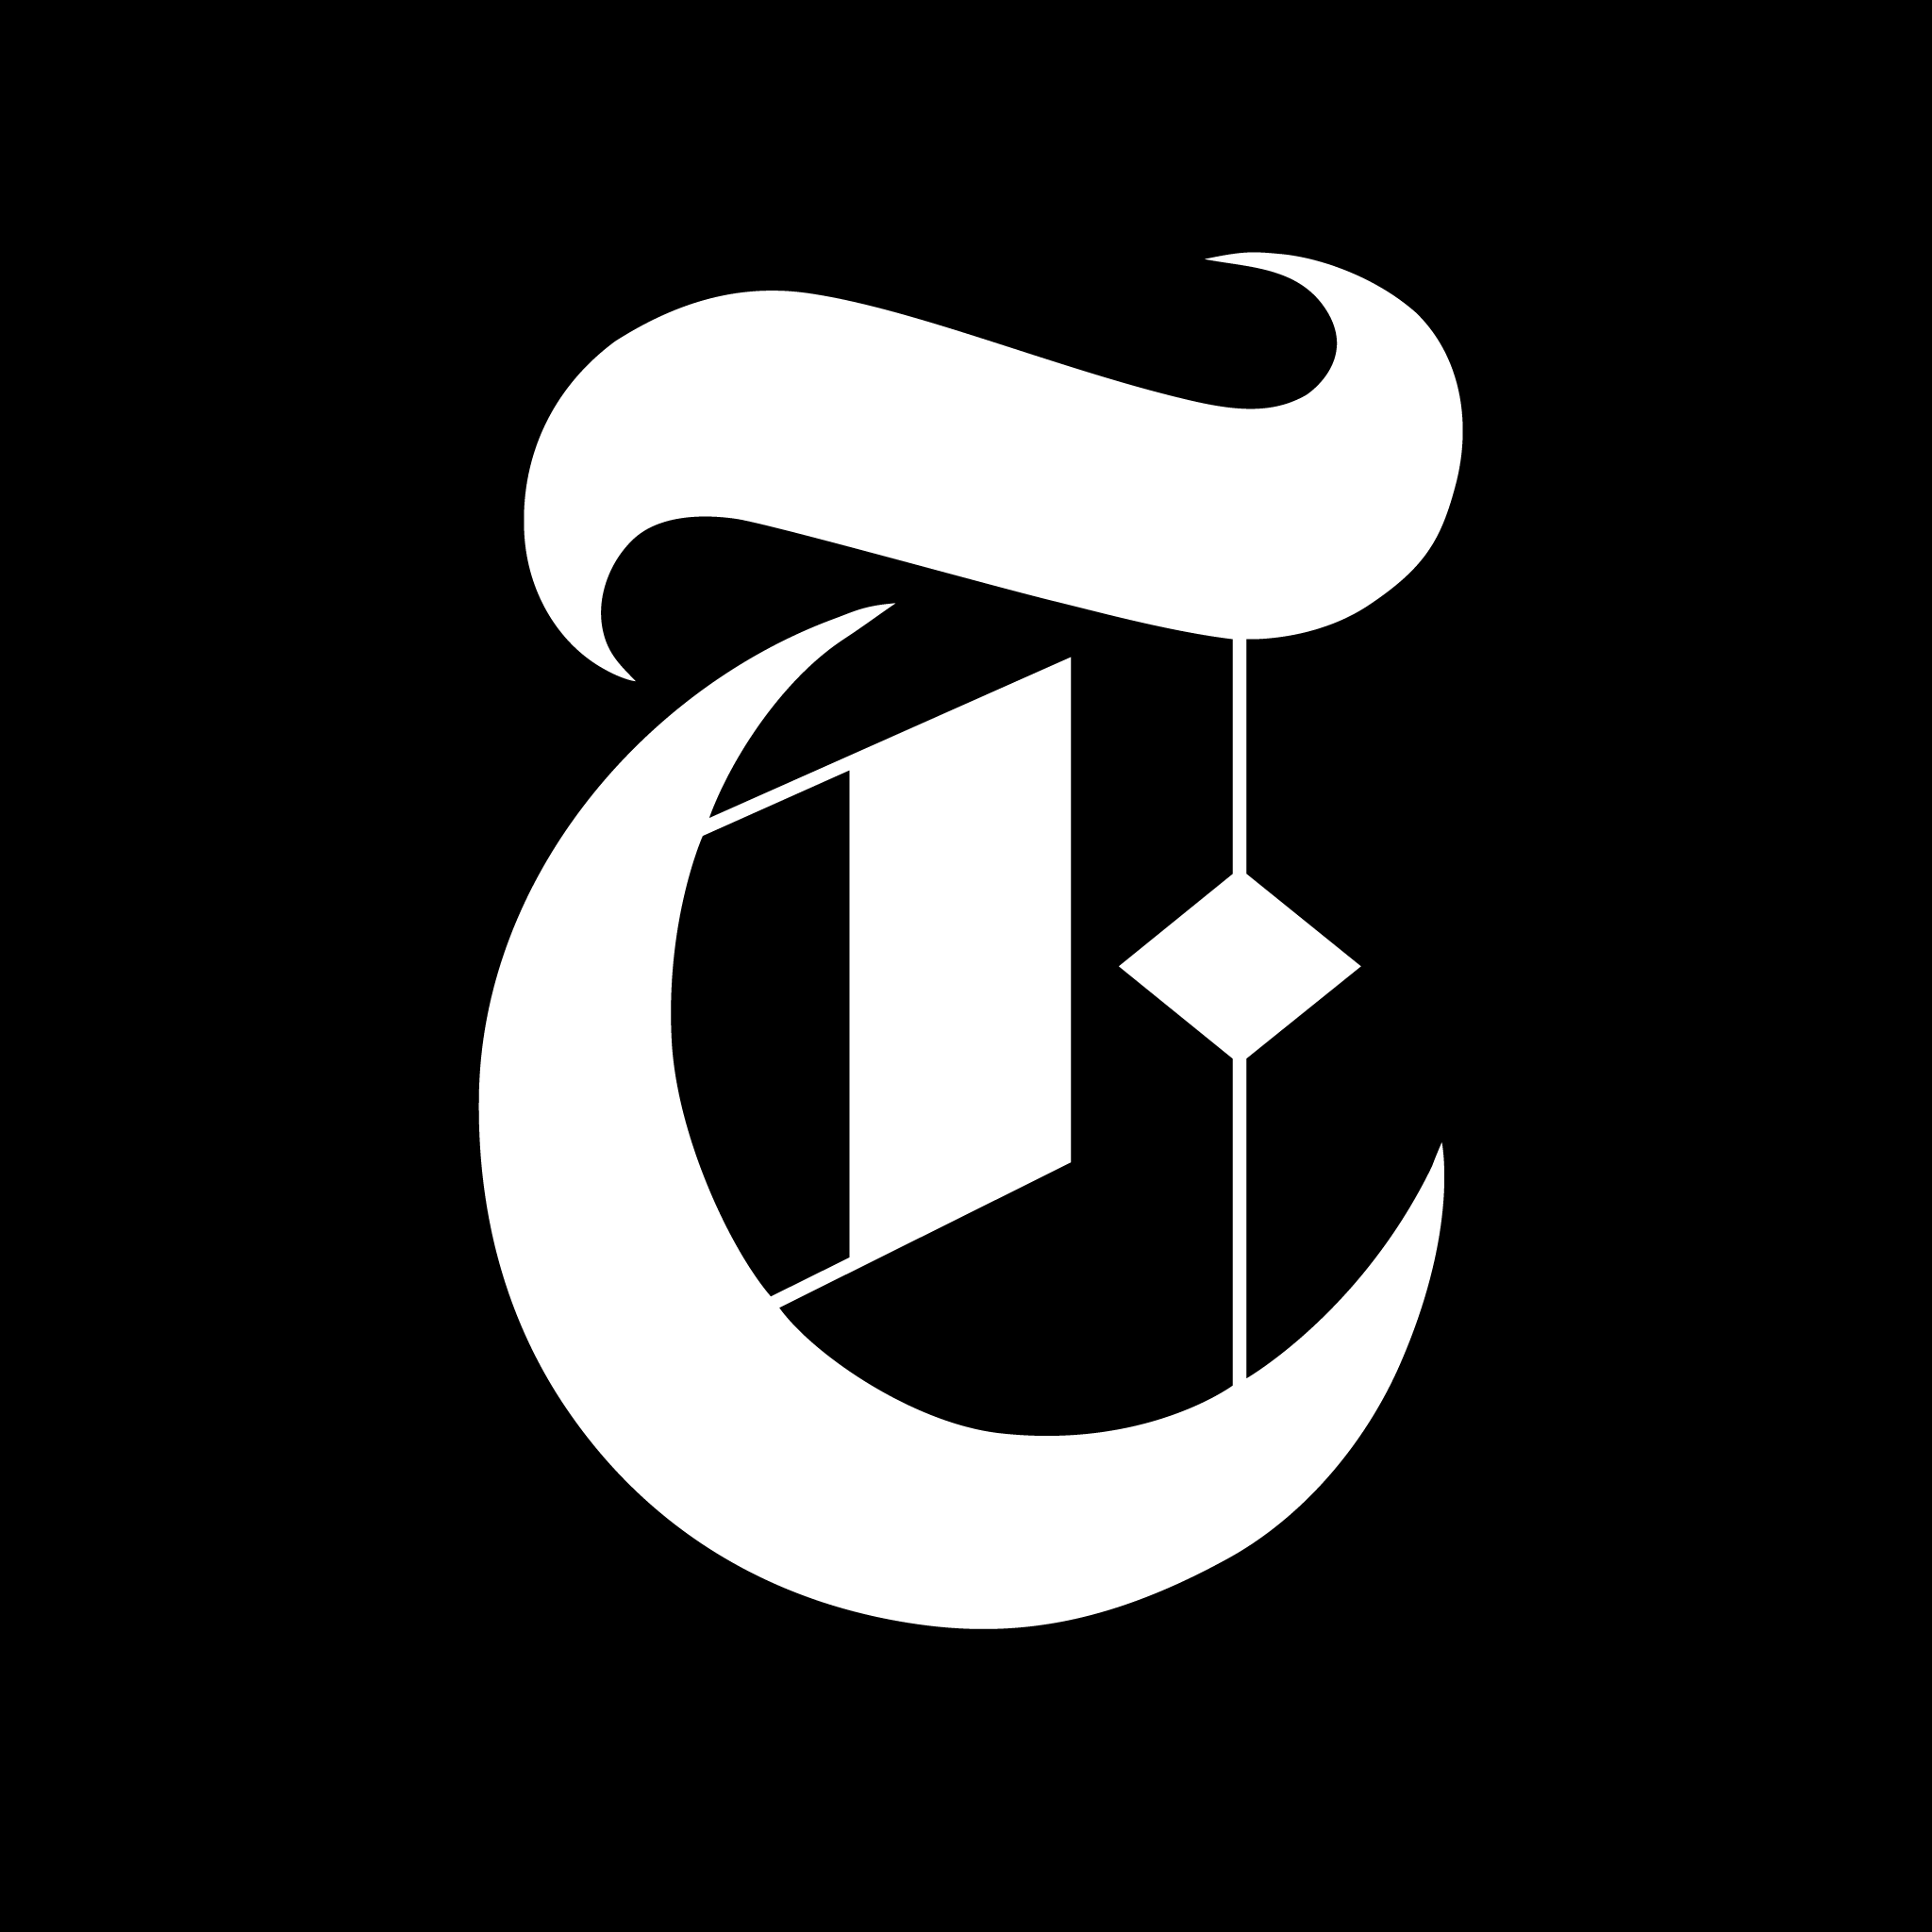 NSFW Memo From Tribune Executive Brings Apology – NYTimes.com